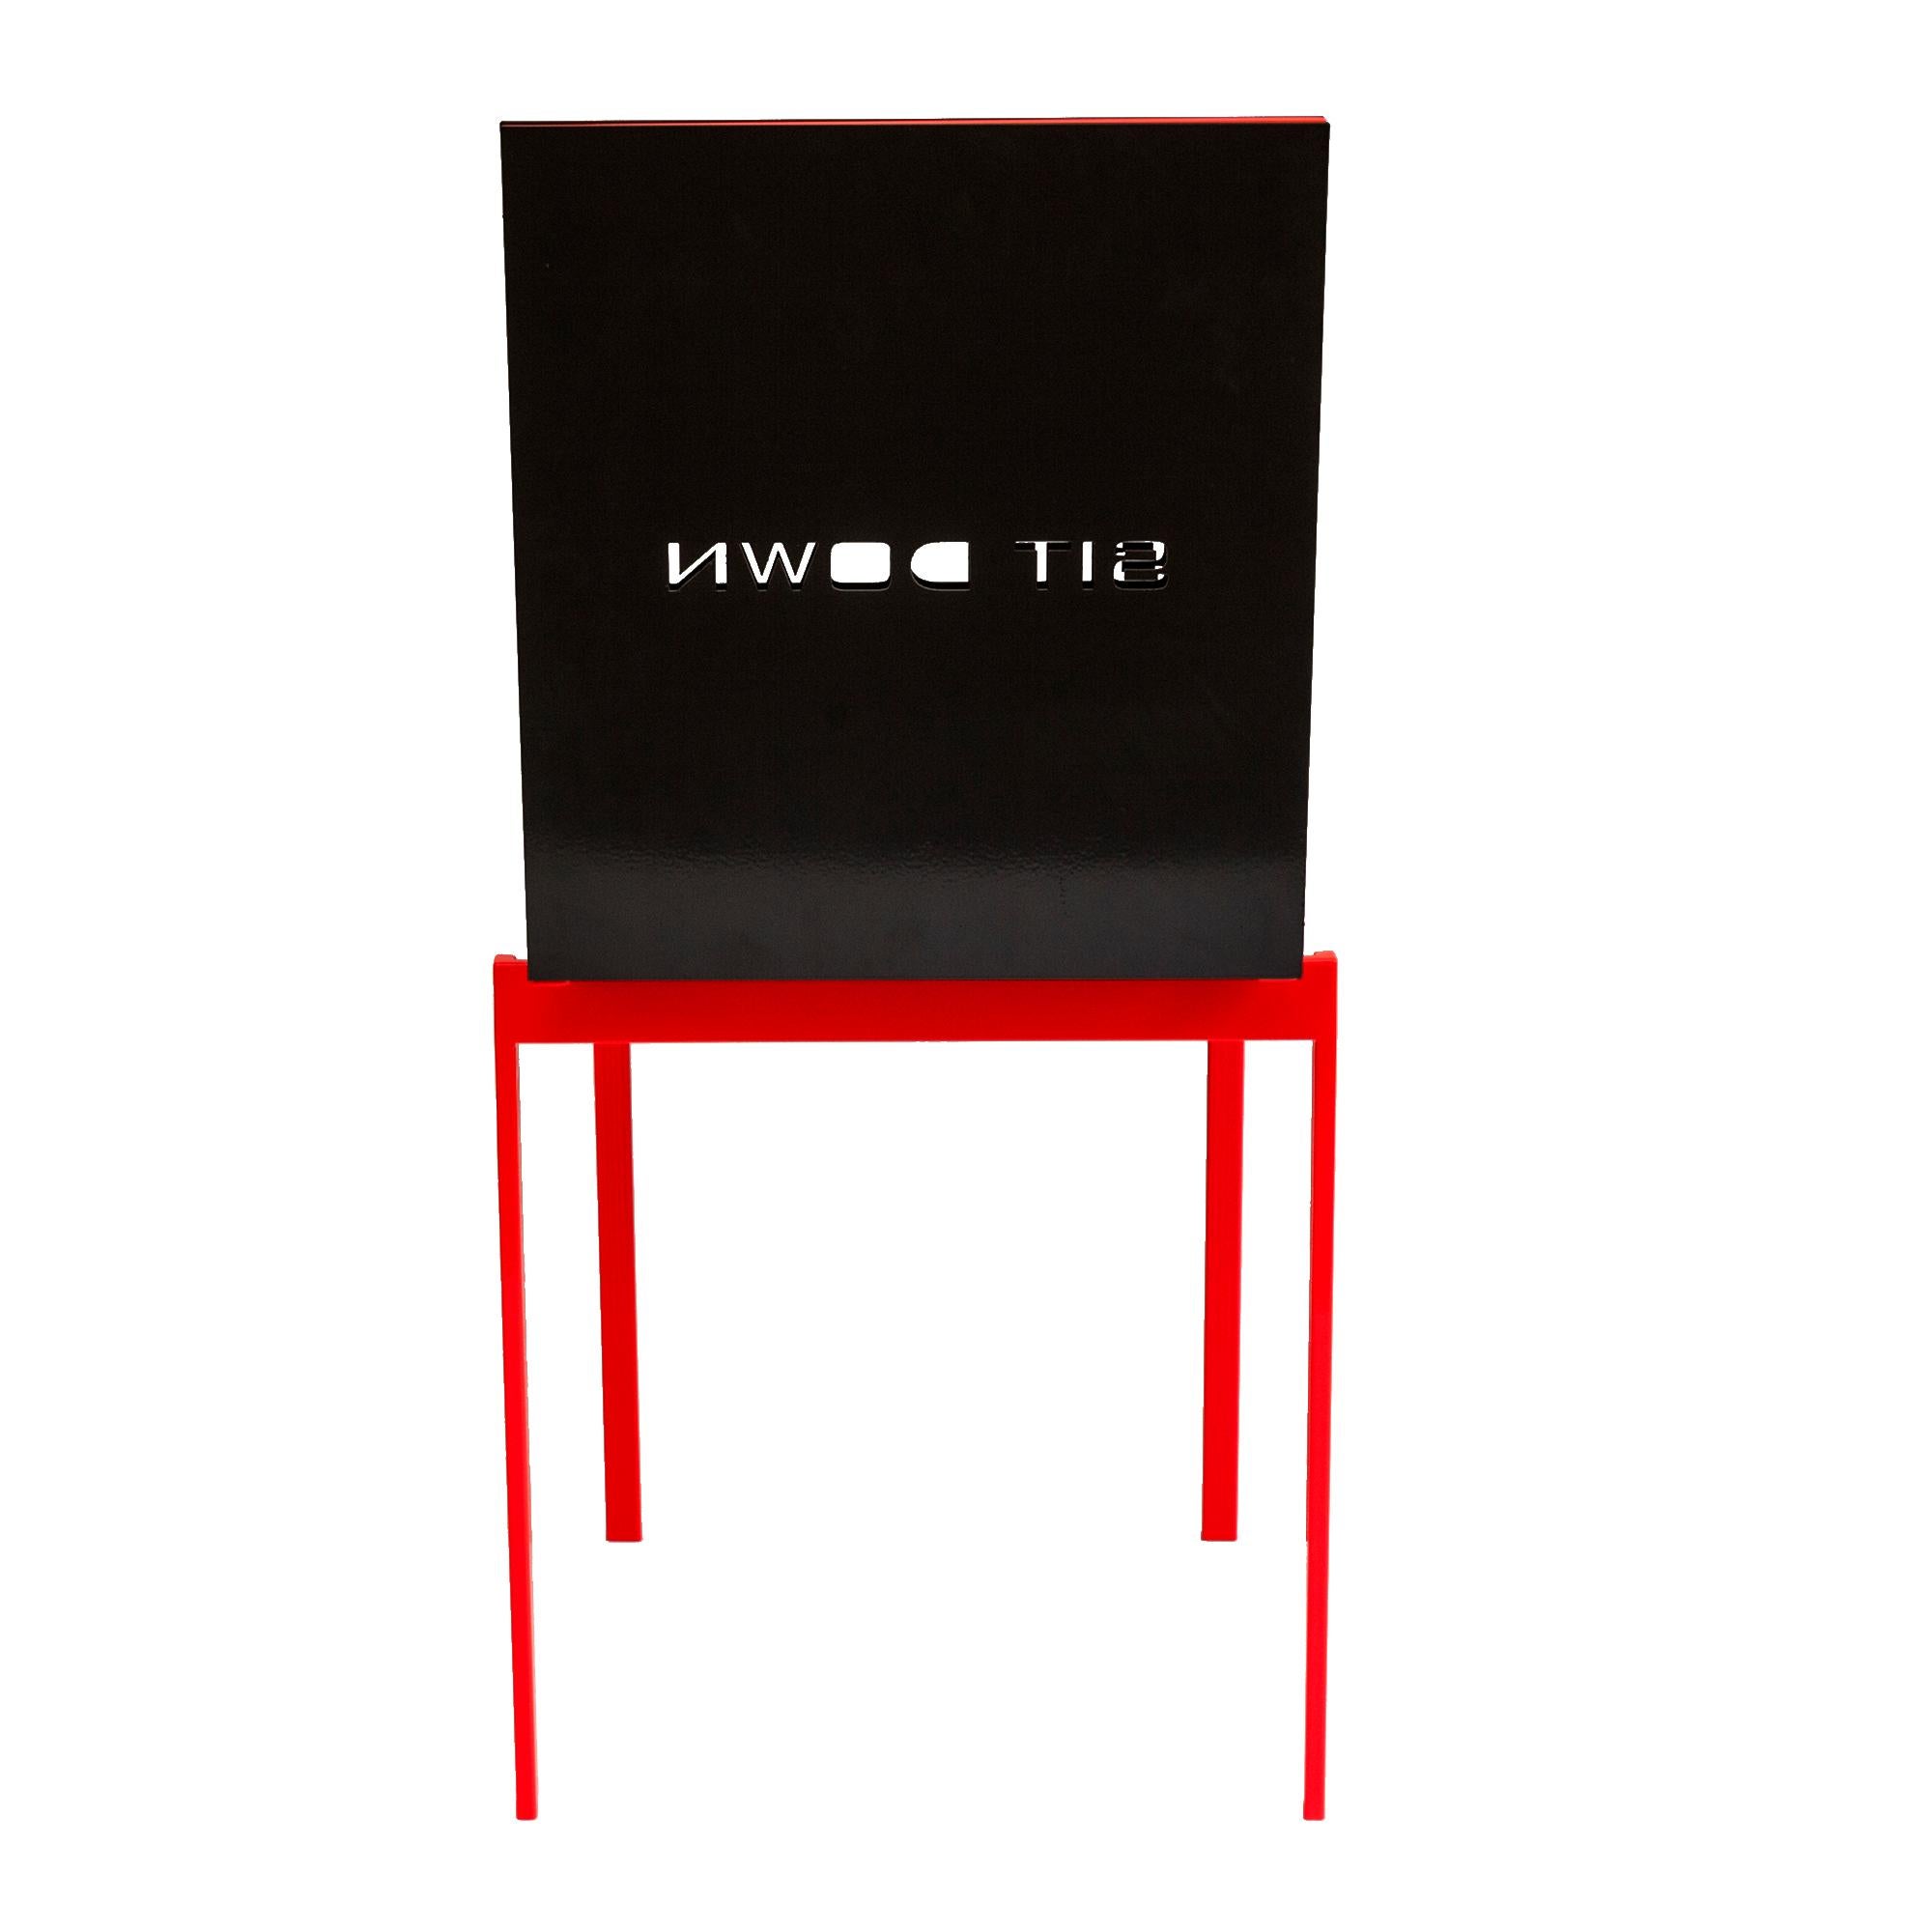 Metalwork Contemporary Mark Chair in Umbra Grey Colored Aluminum, Sit Down Inscription For Sale